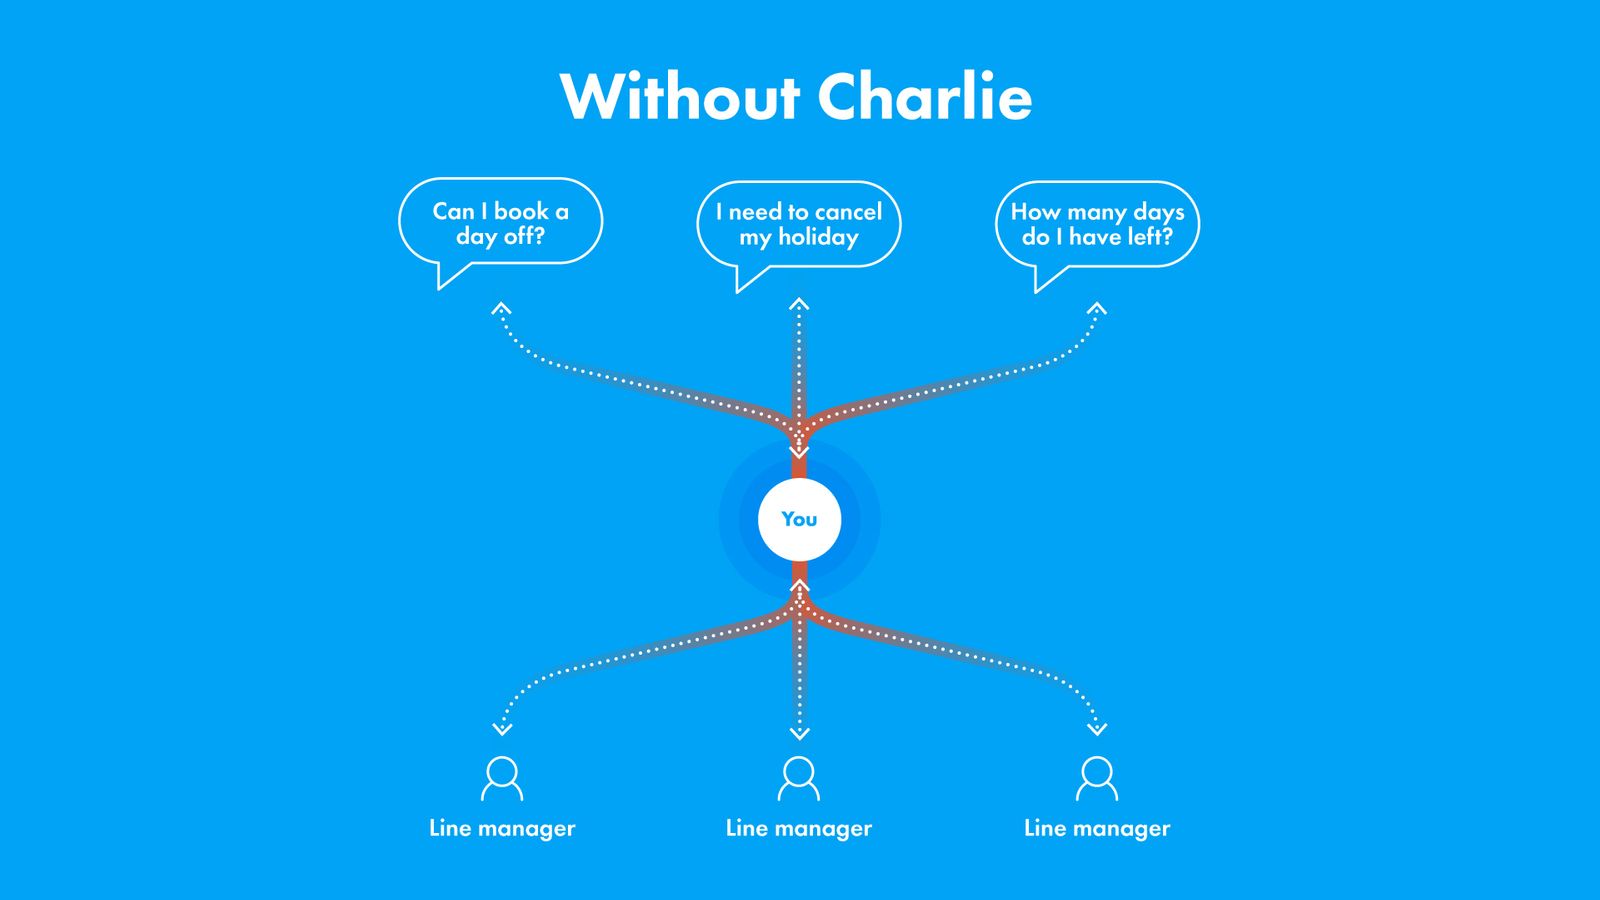 Graph explaining that without Charlie managers are not able to tend to employee's requests as soon as possible